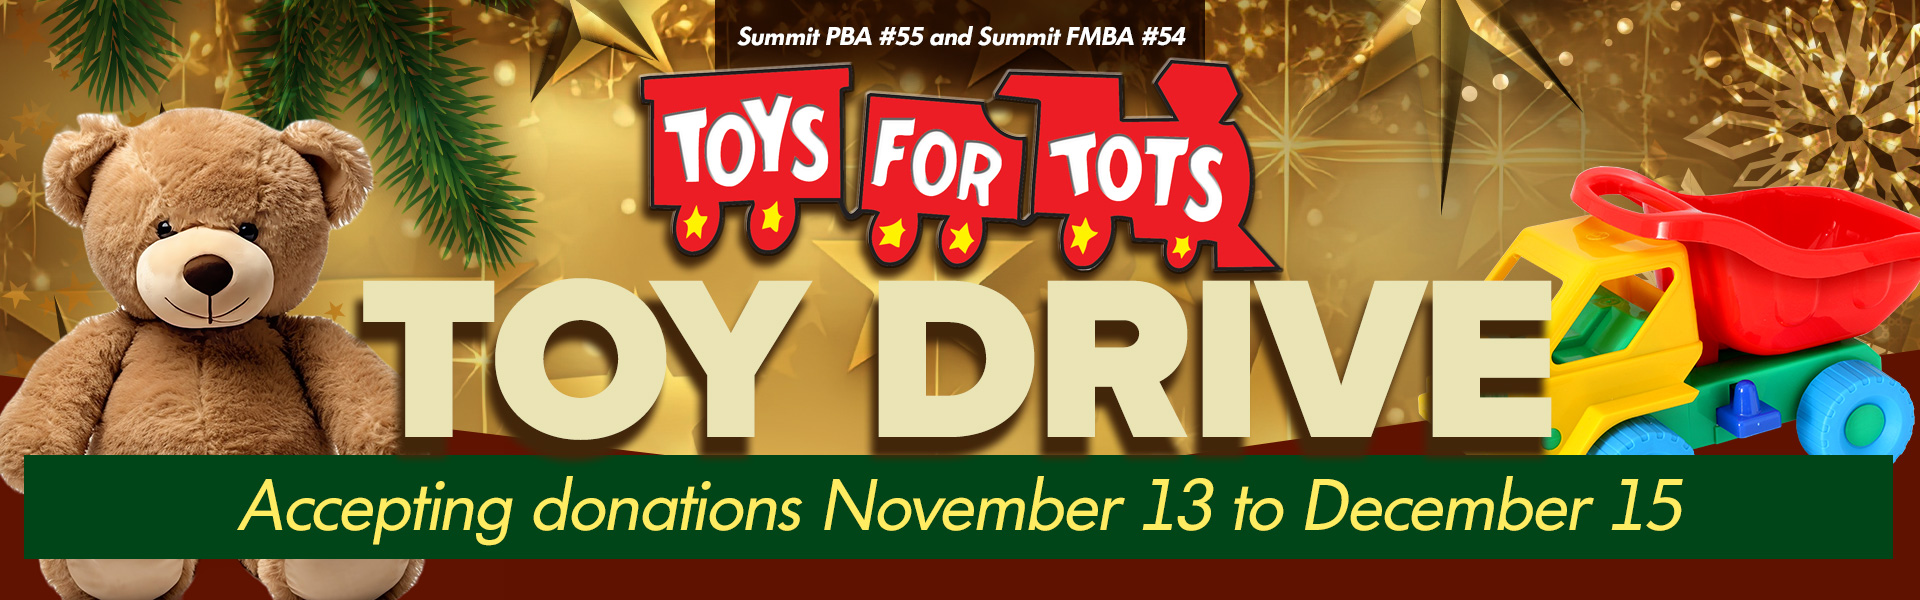 Toys for Tots - header